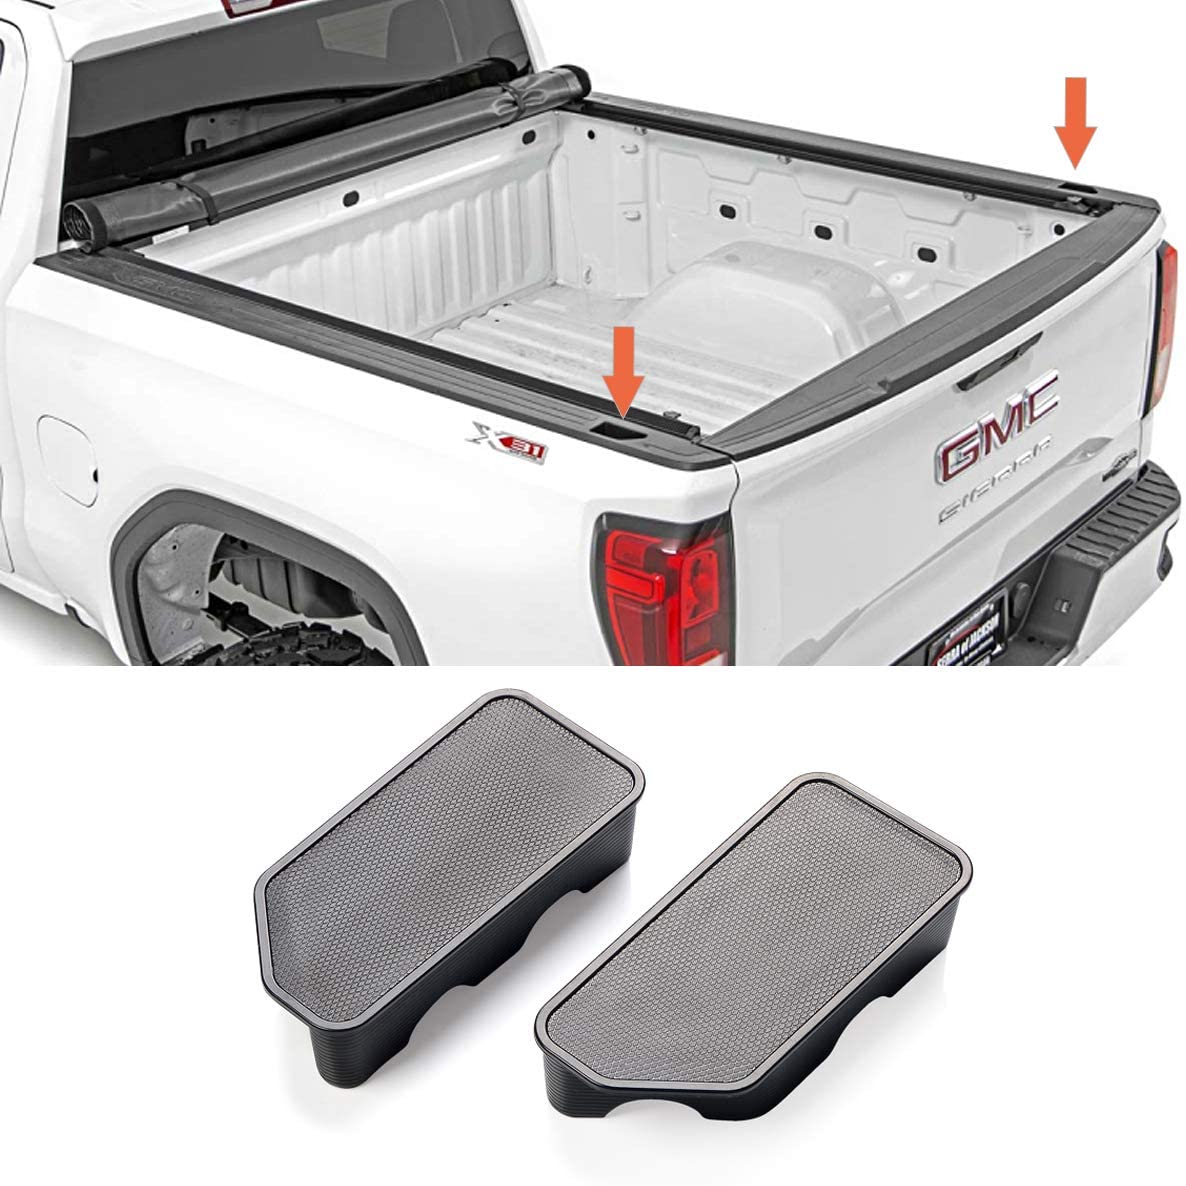 Top 15 Truck Bed Hole Plugs Reviews & Comparison 2023